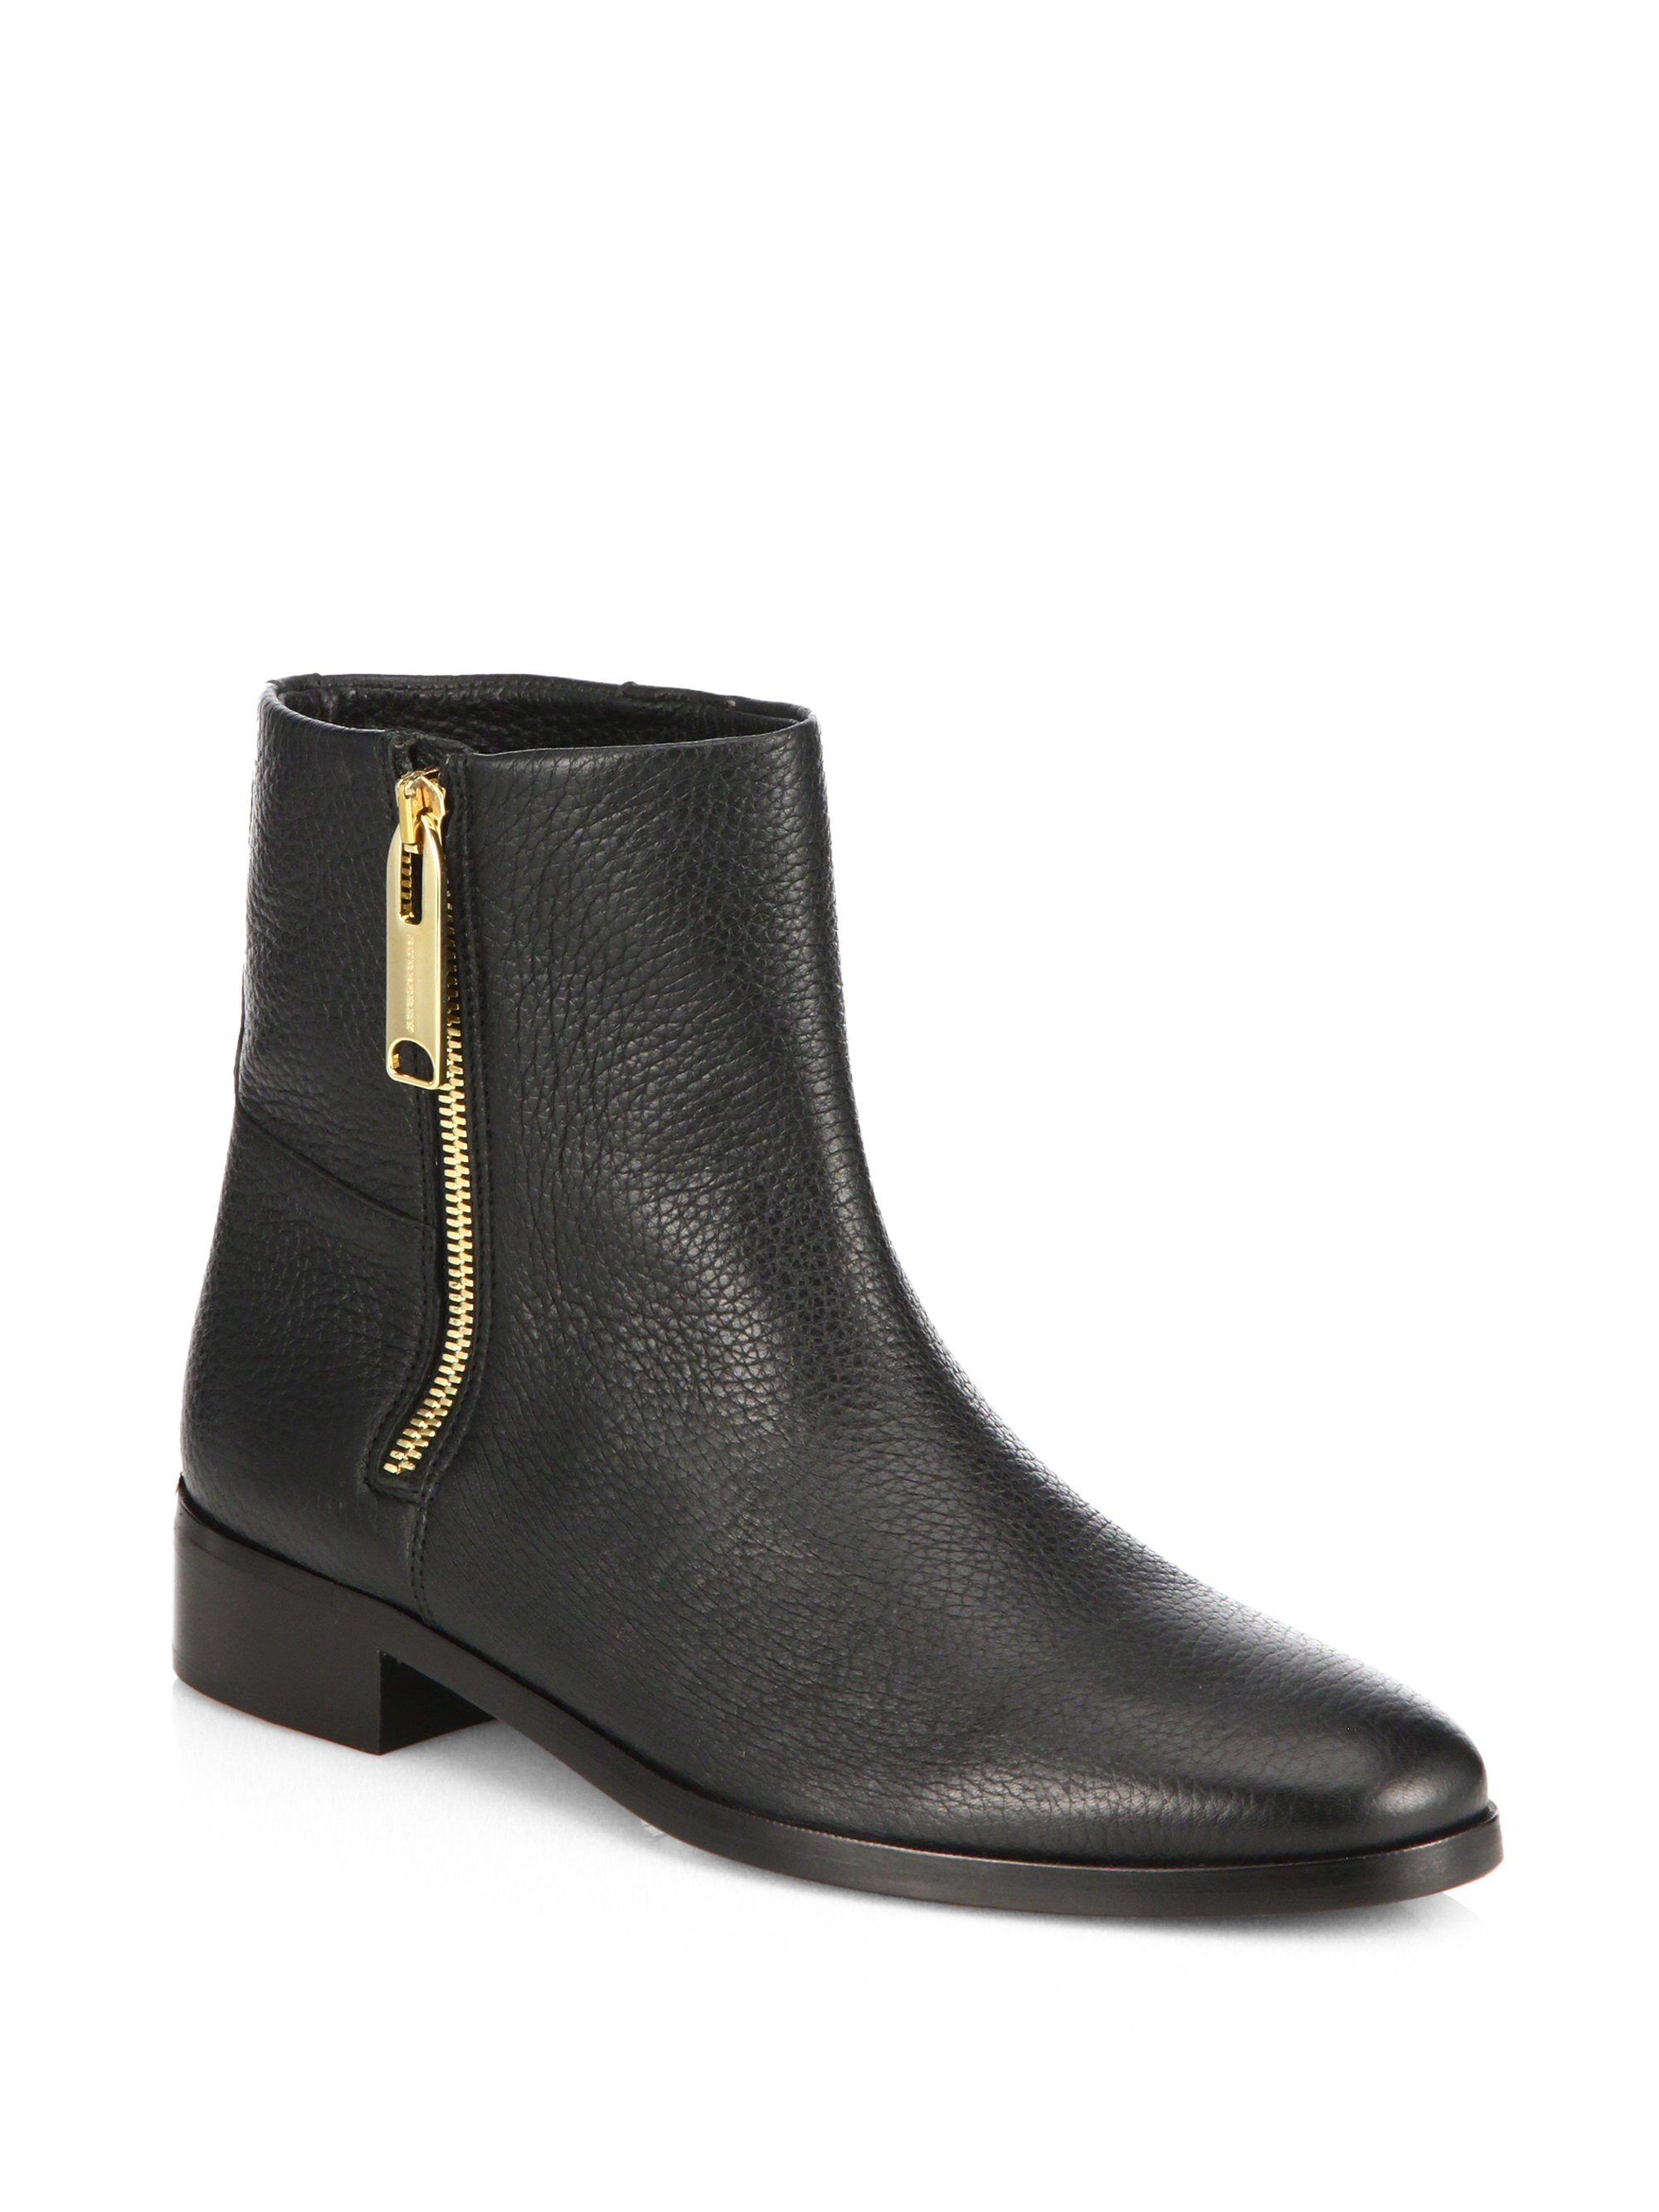 Lyst - Burberry Failford Flat Ankle Boots in Black